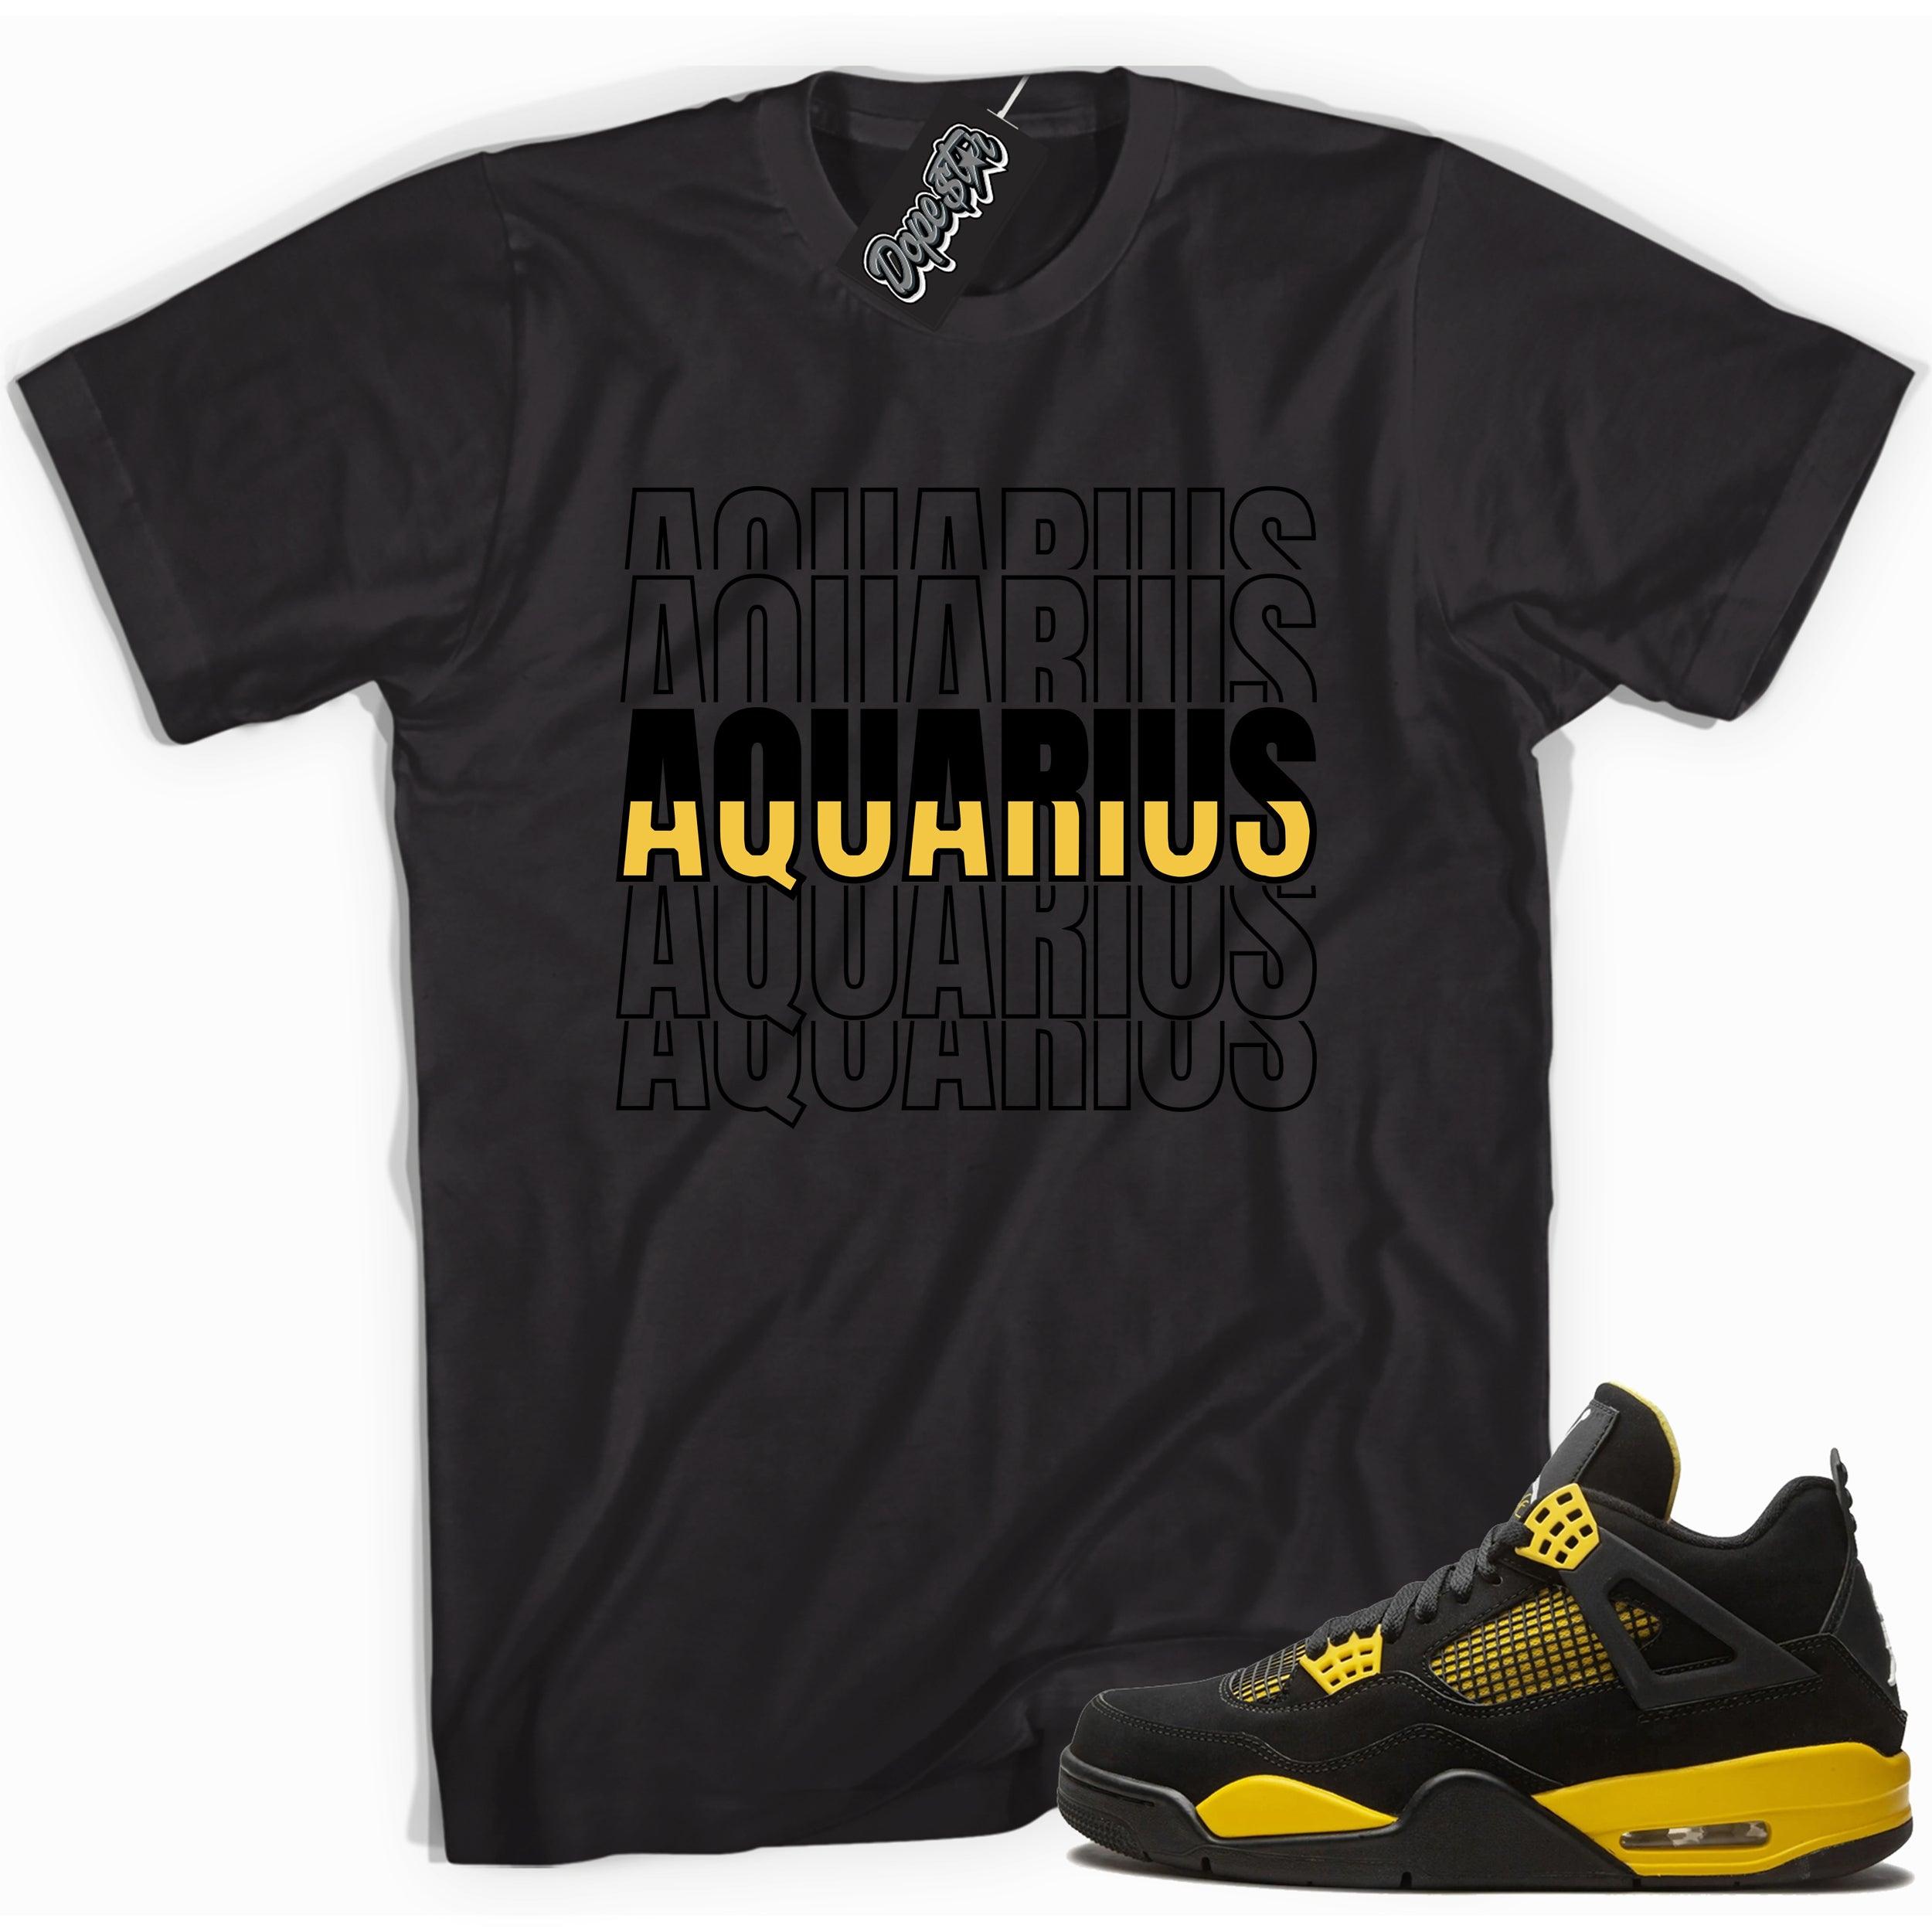 Cool black graphic tee with 'aquarius' print, that perfectly matches  Air Jordan 4 Thunder sneakers